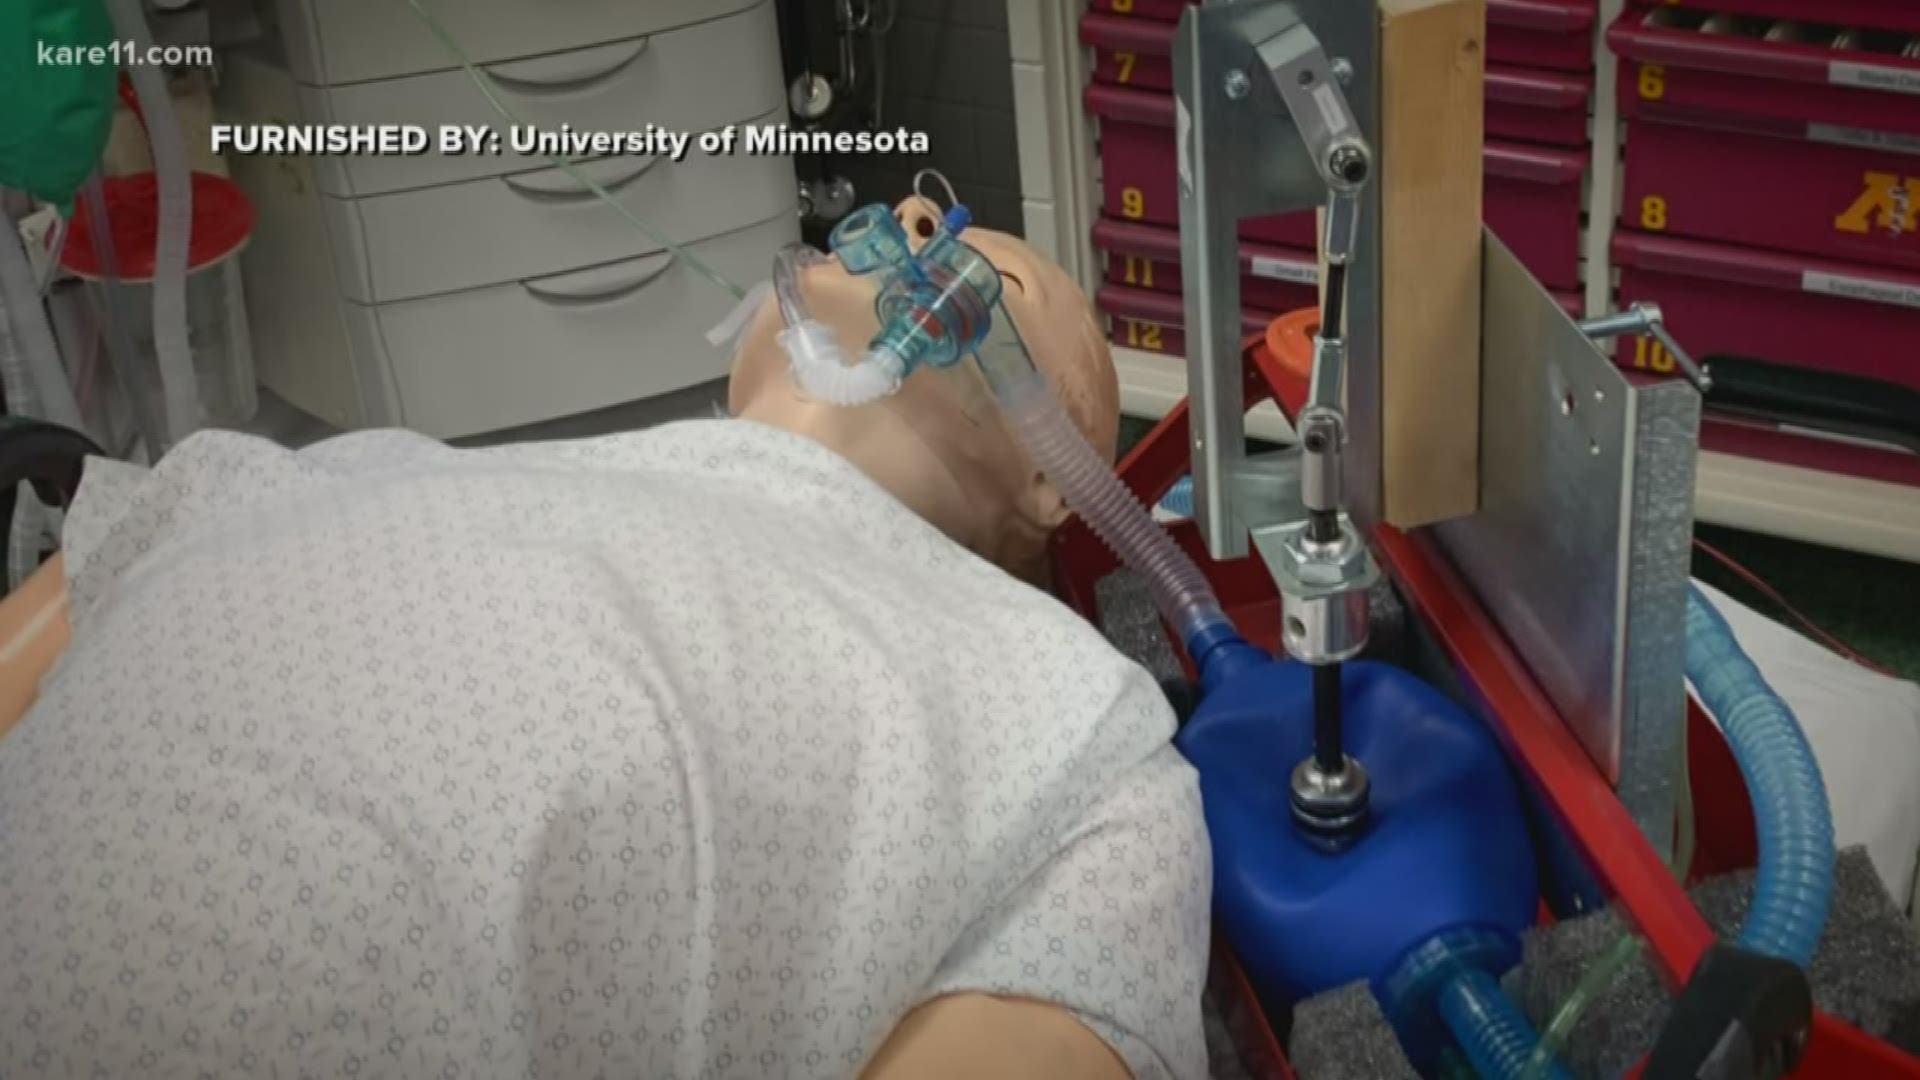 Using spare parts, a local doctor says his team has come up with a low-cost solution to the ventilator shortage.